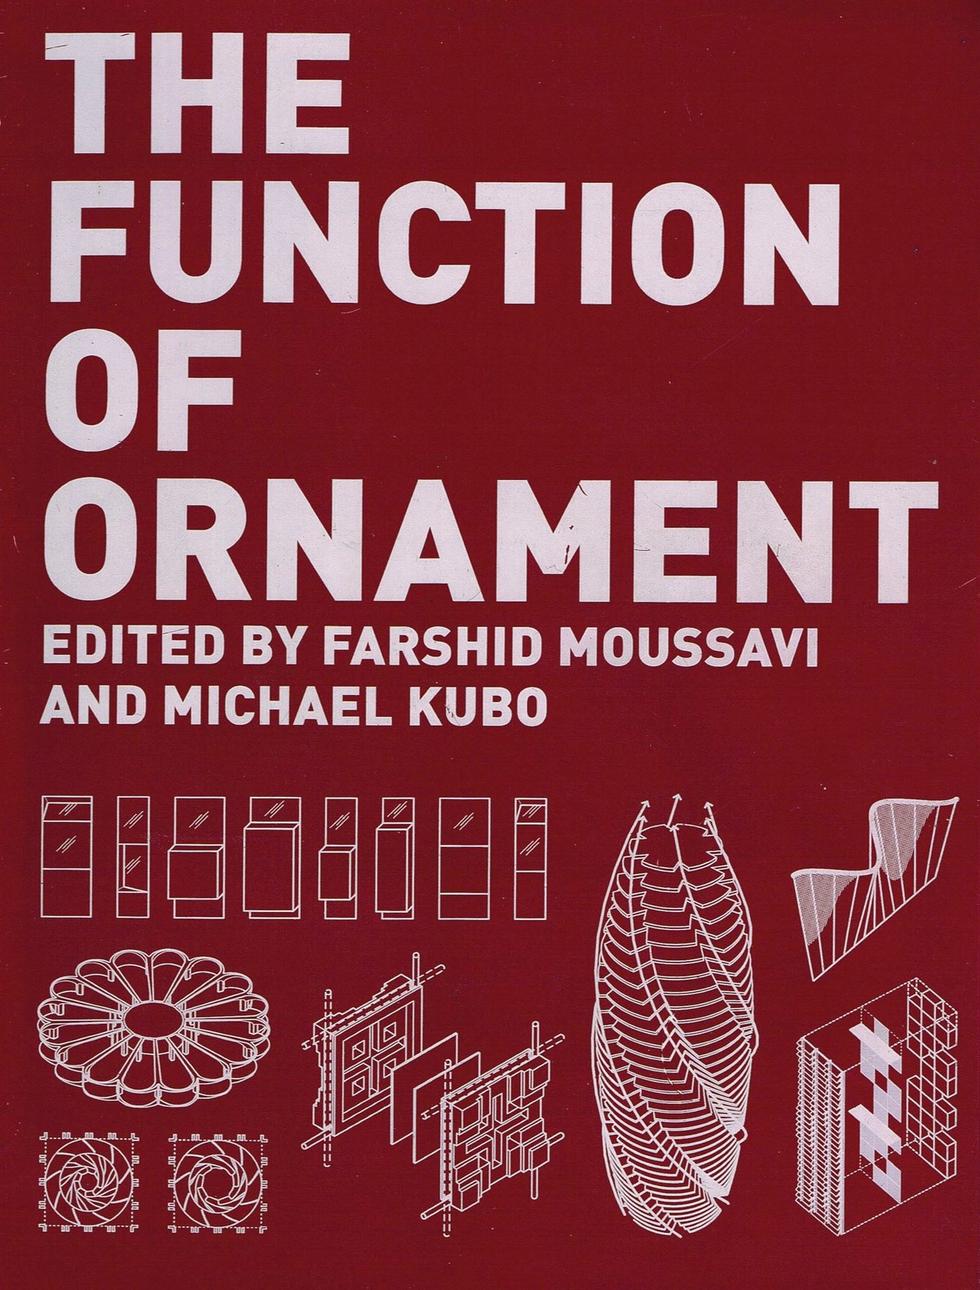 The function of ornament